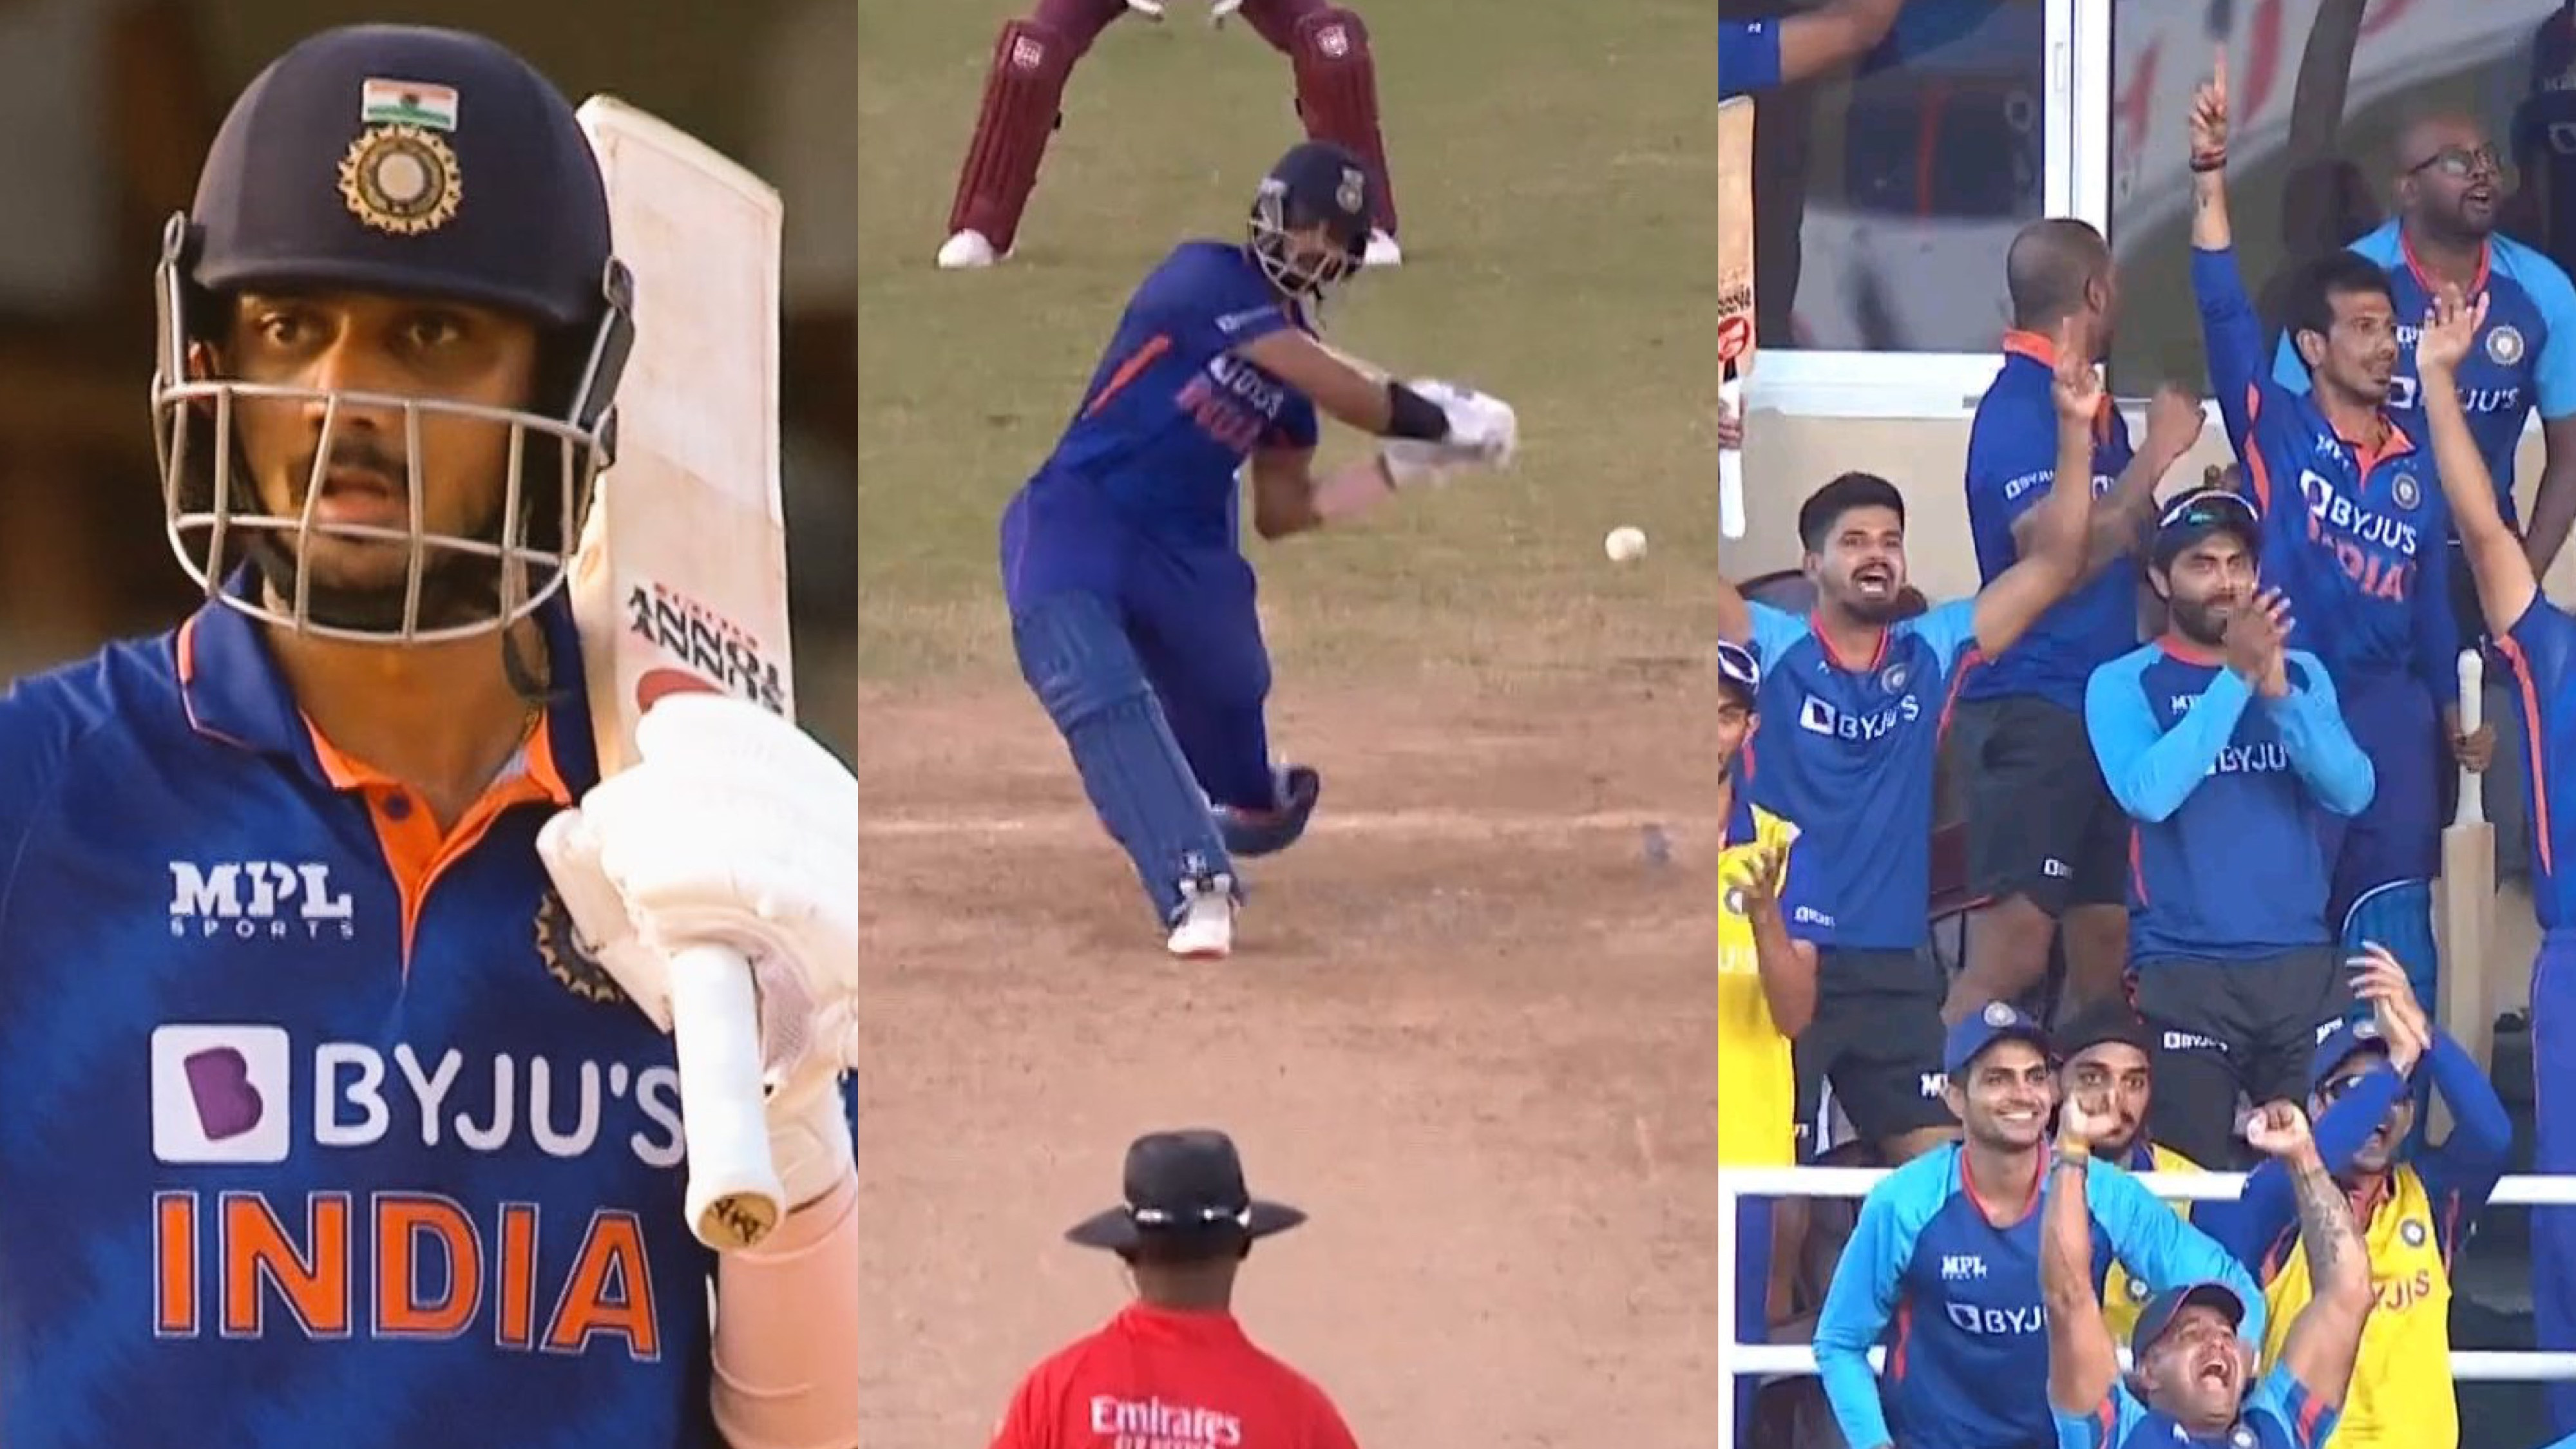 WI v IND 2022: WATCH - Akshar Patel finishes it off with a six; Team India reacts in jubilation after series win